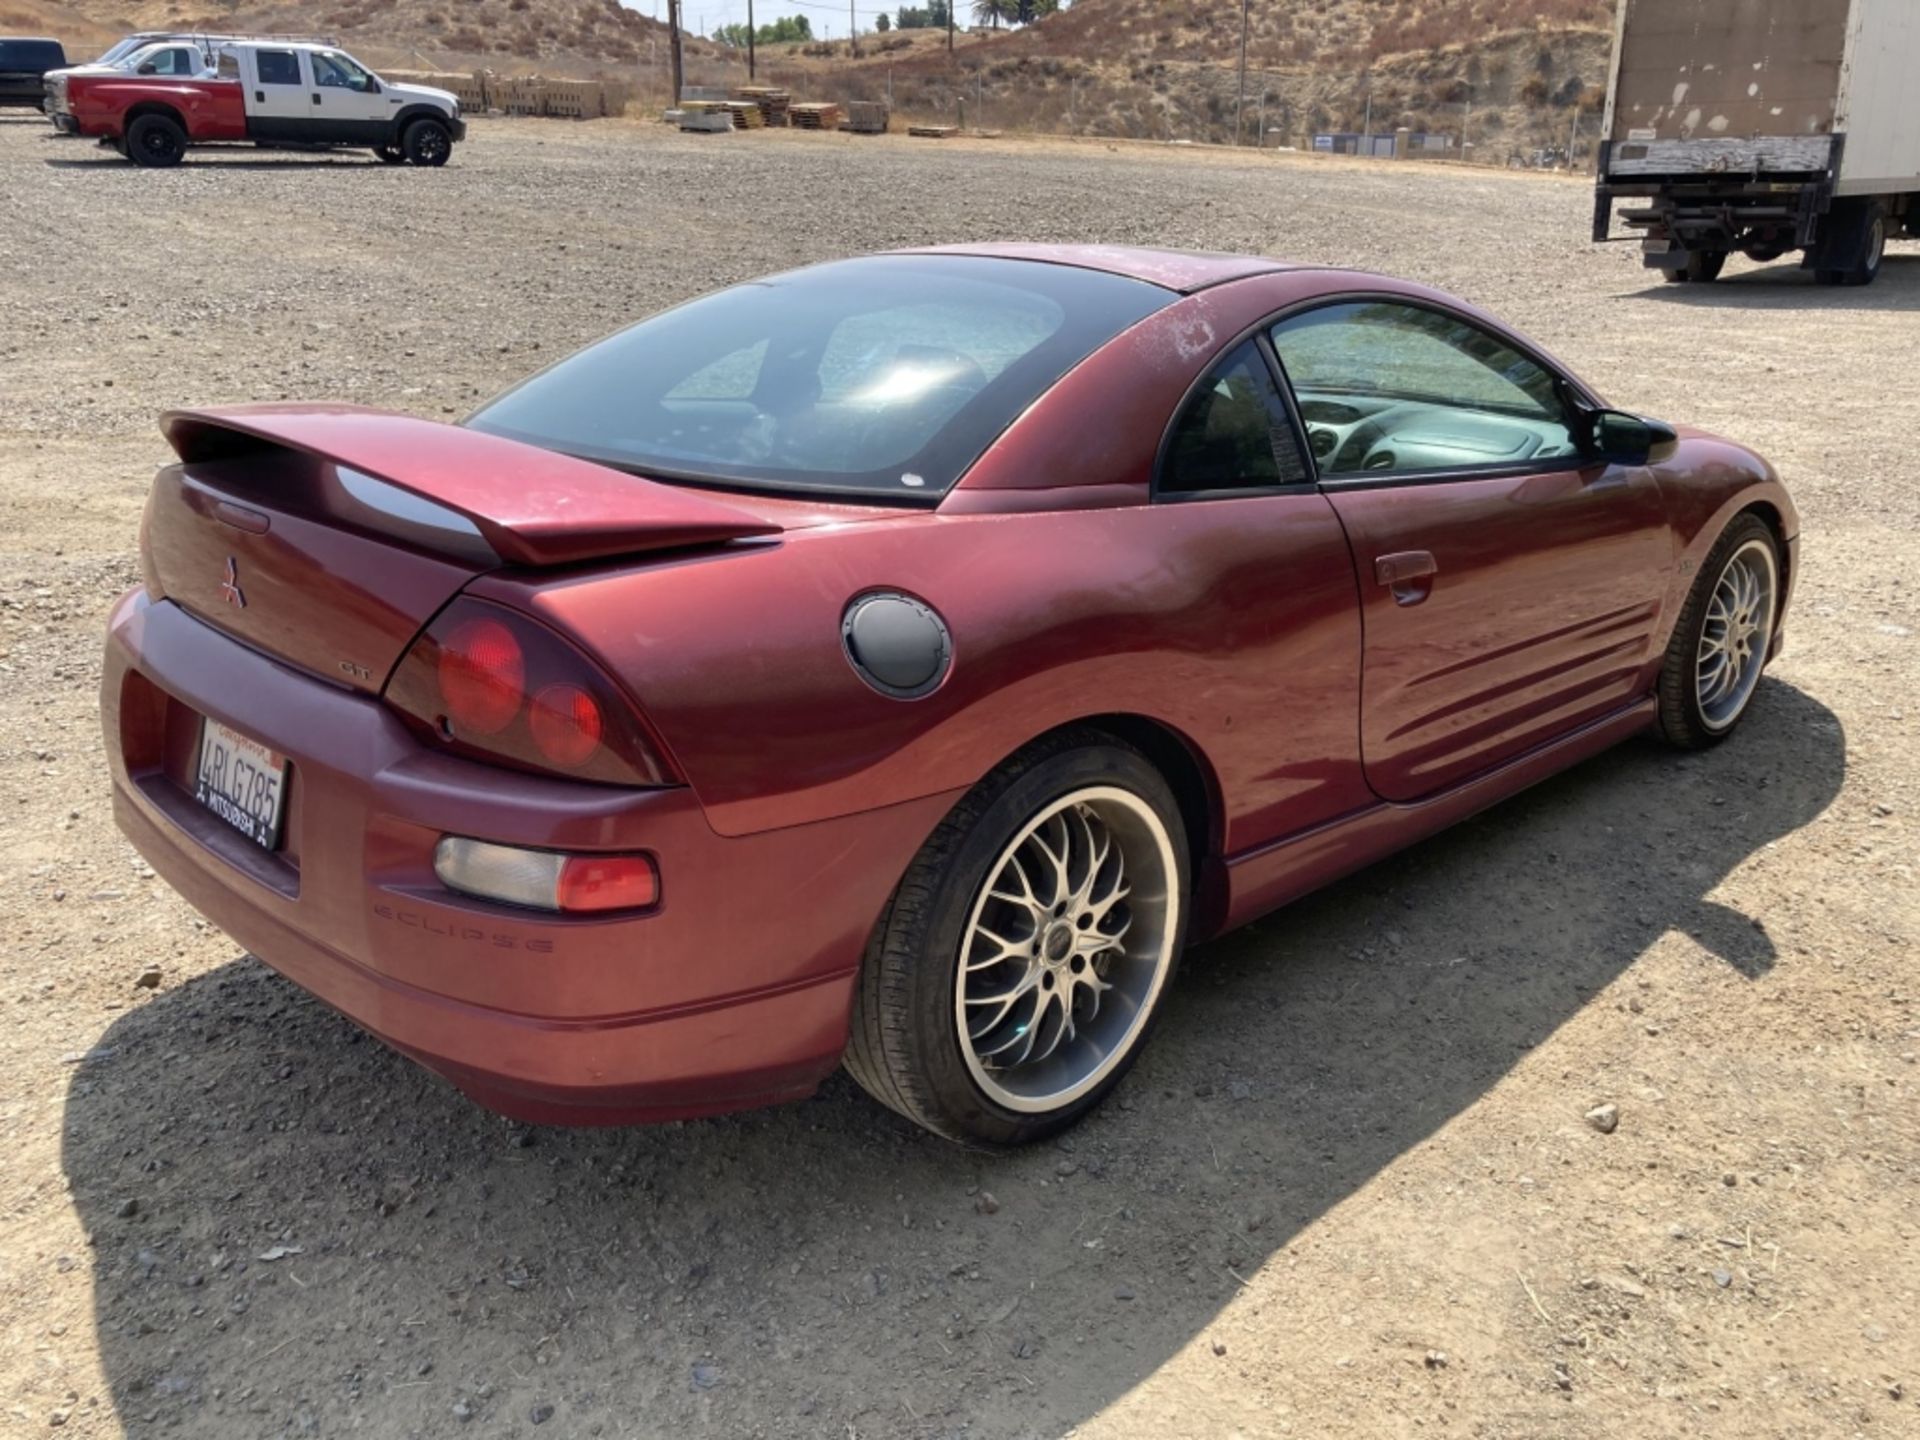 Mitsubishi Eclipse GT Coupe, - Image 3 of 17